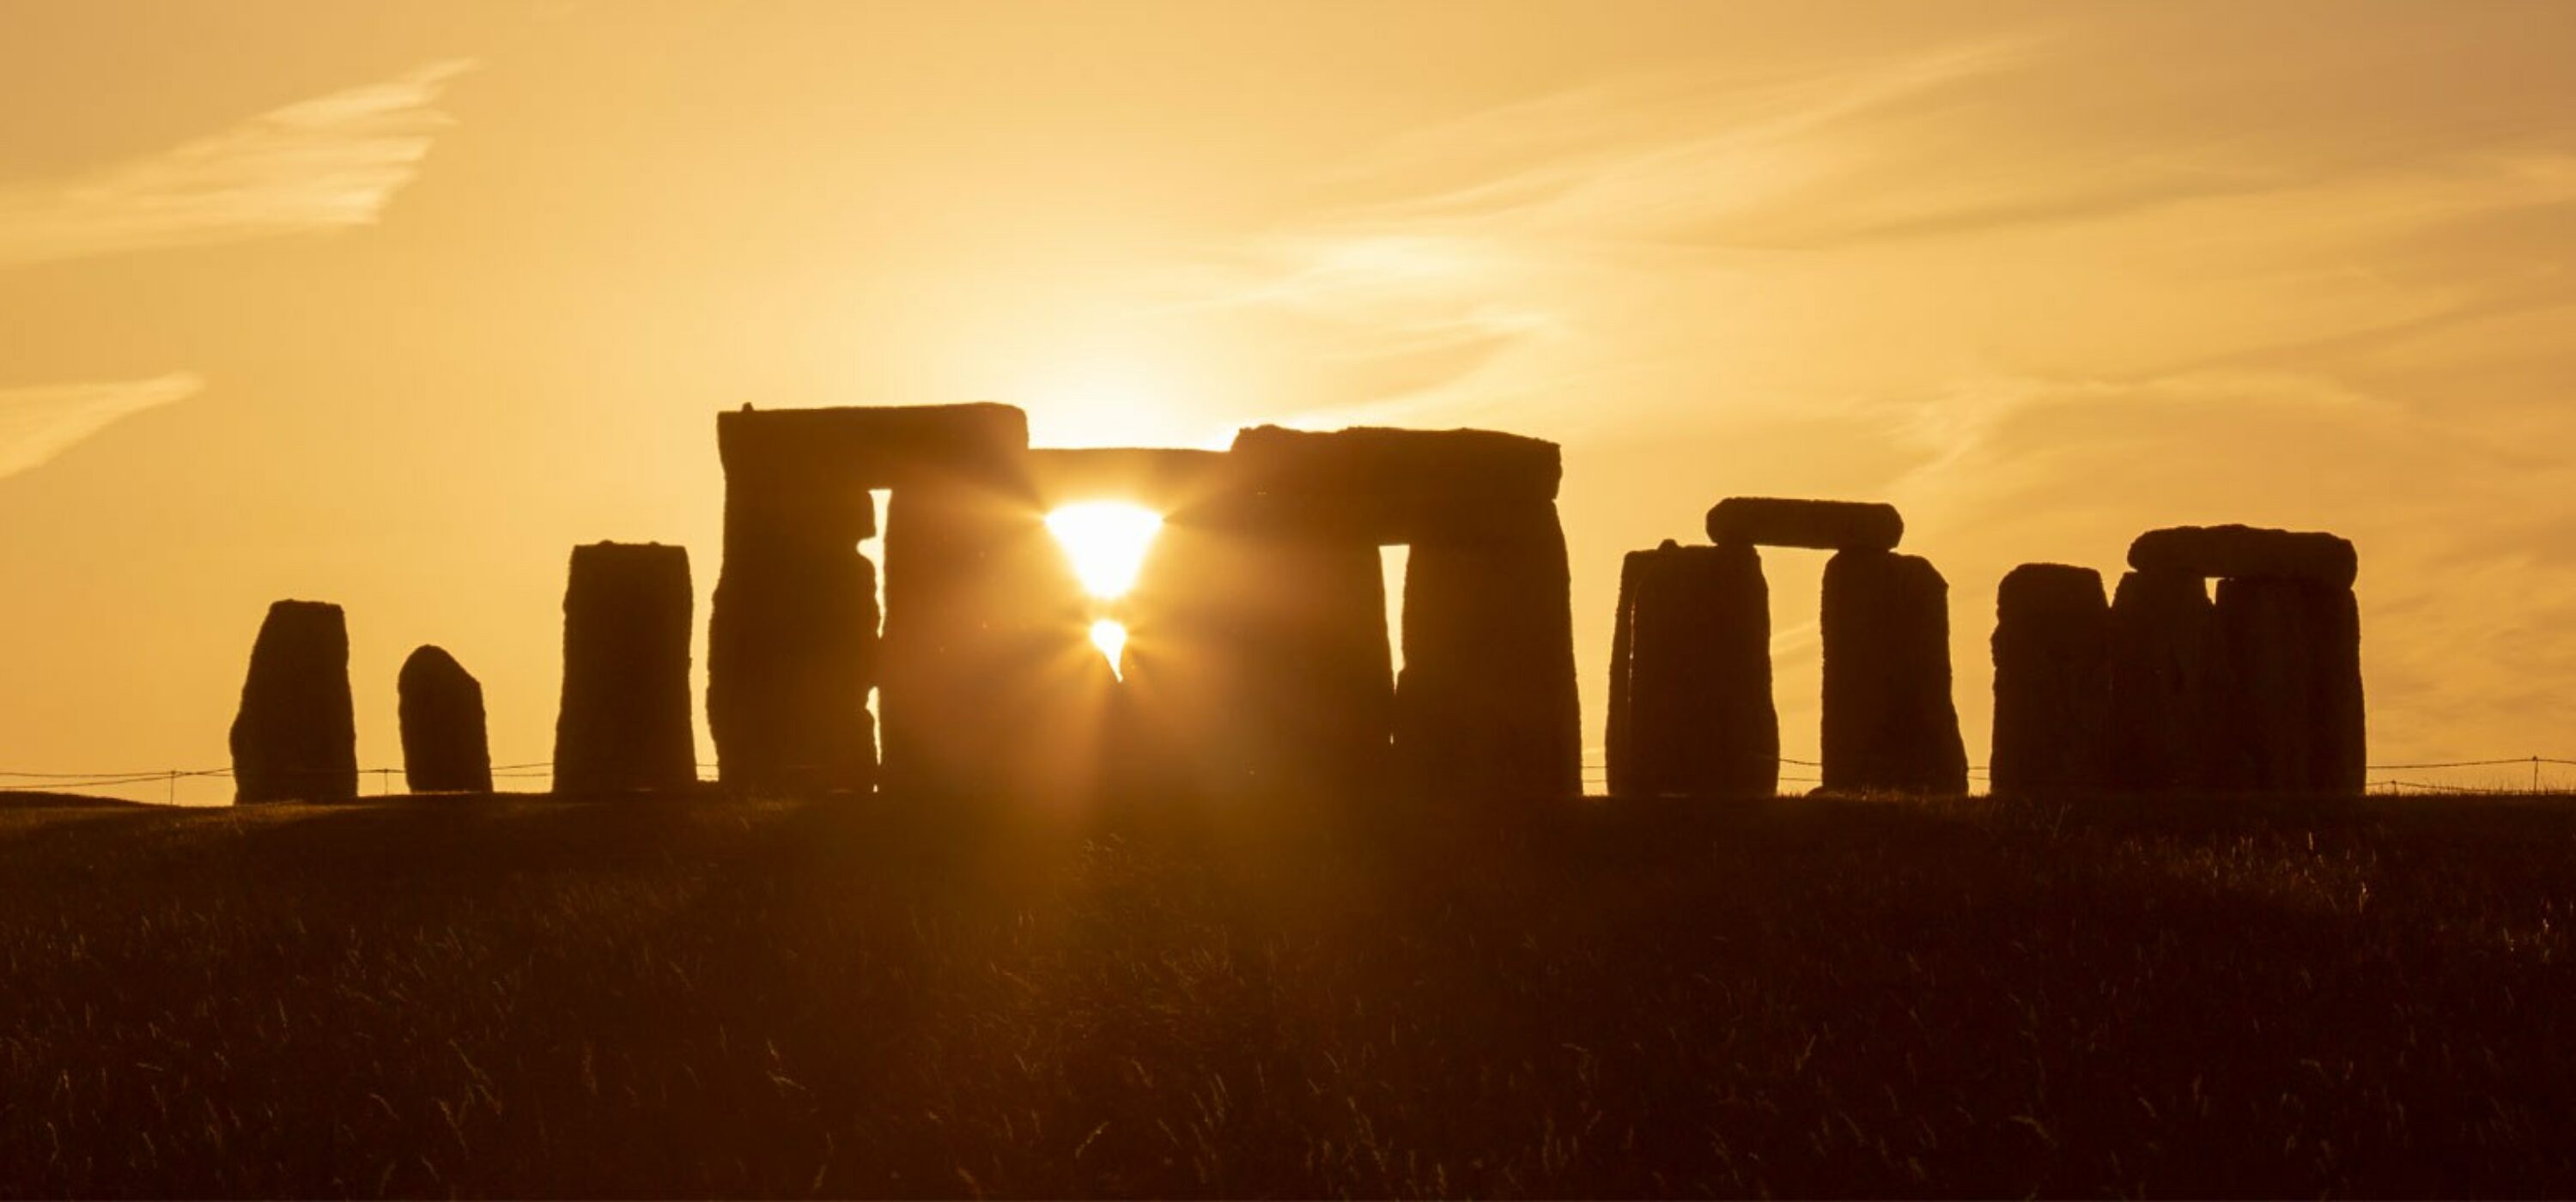 Soak Up the Summer Solstice's Magic With These Rituals